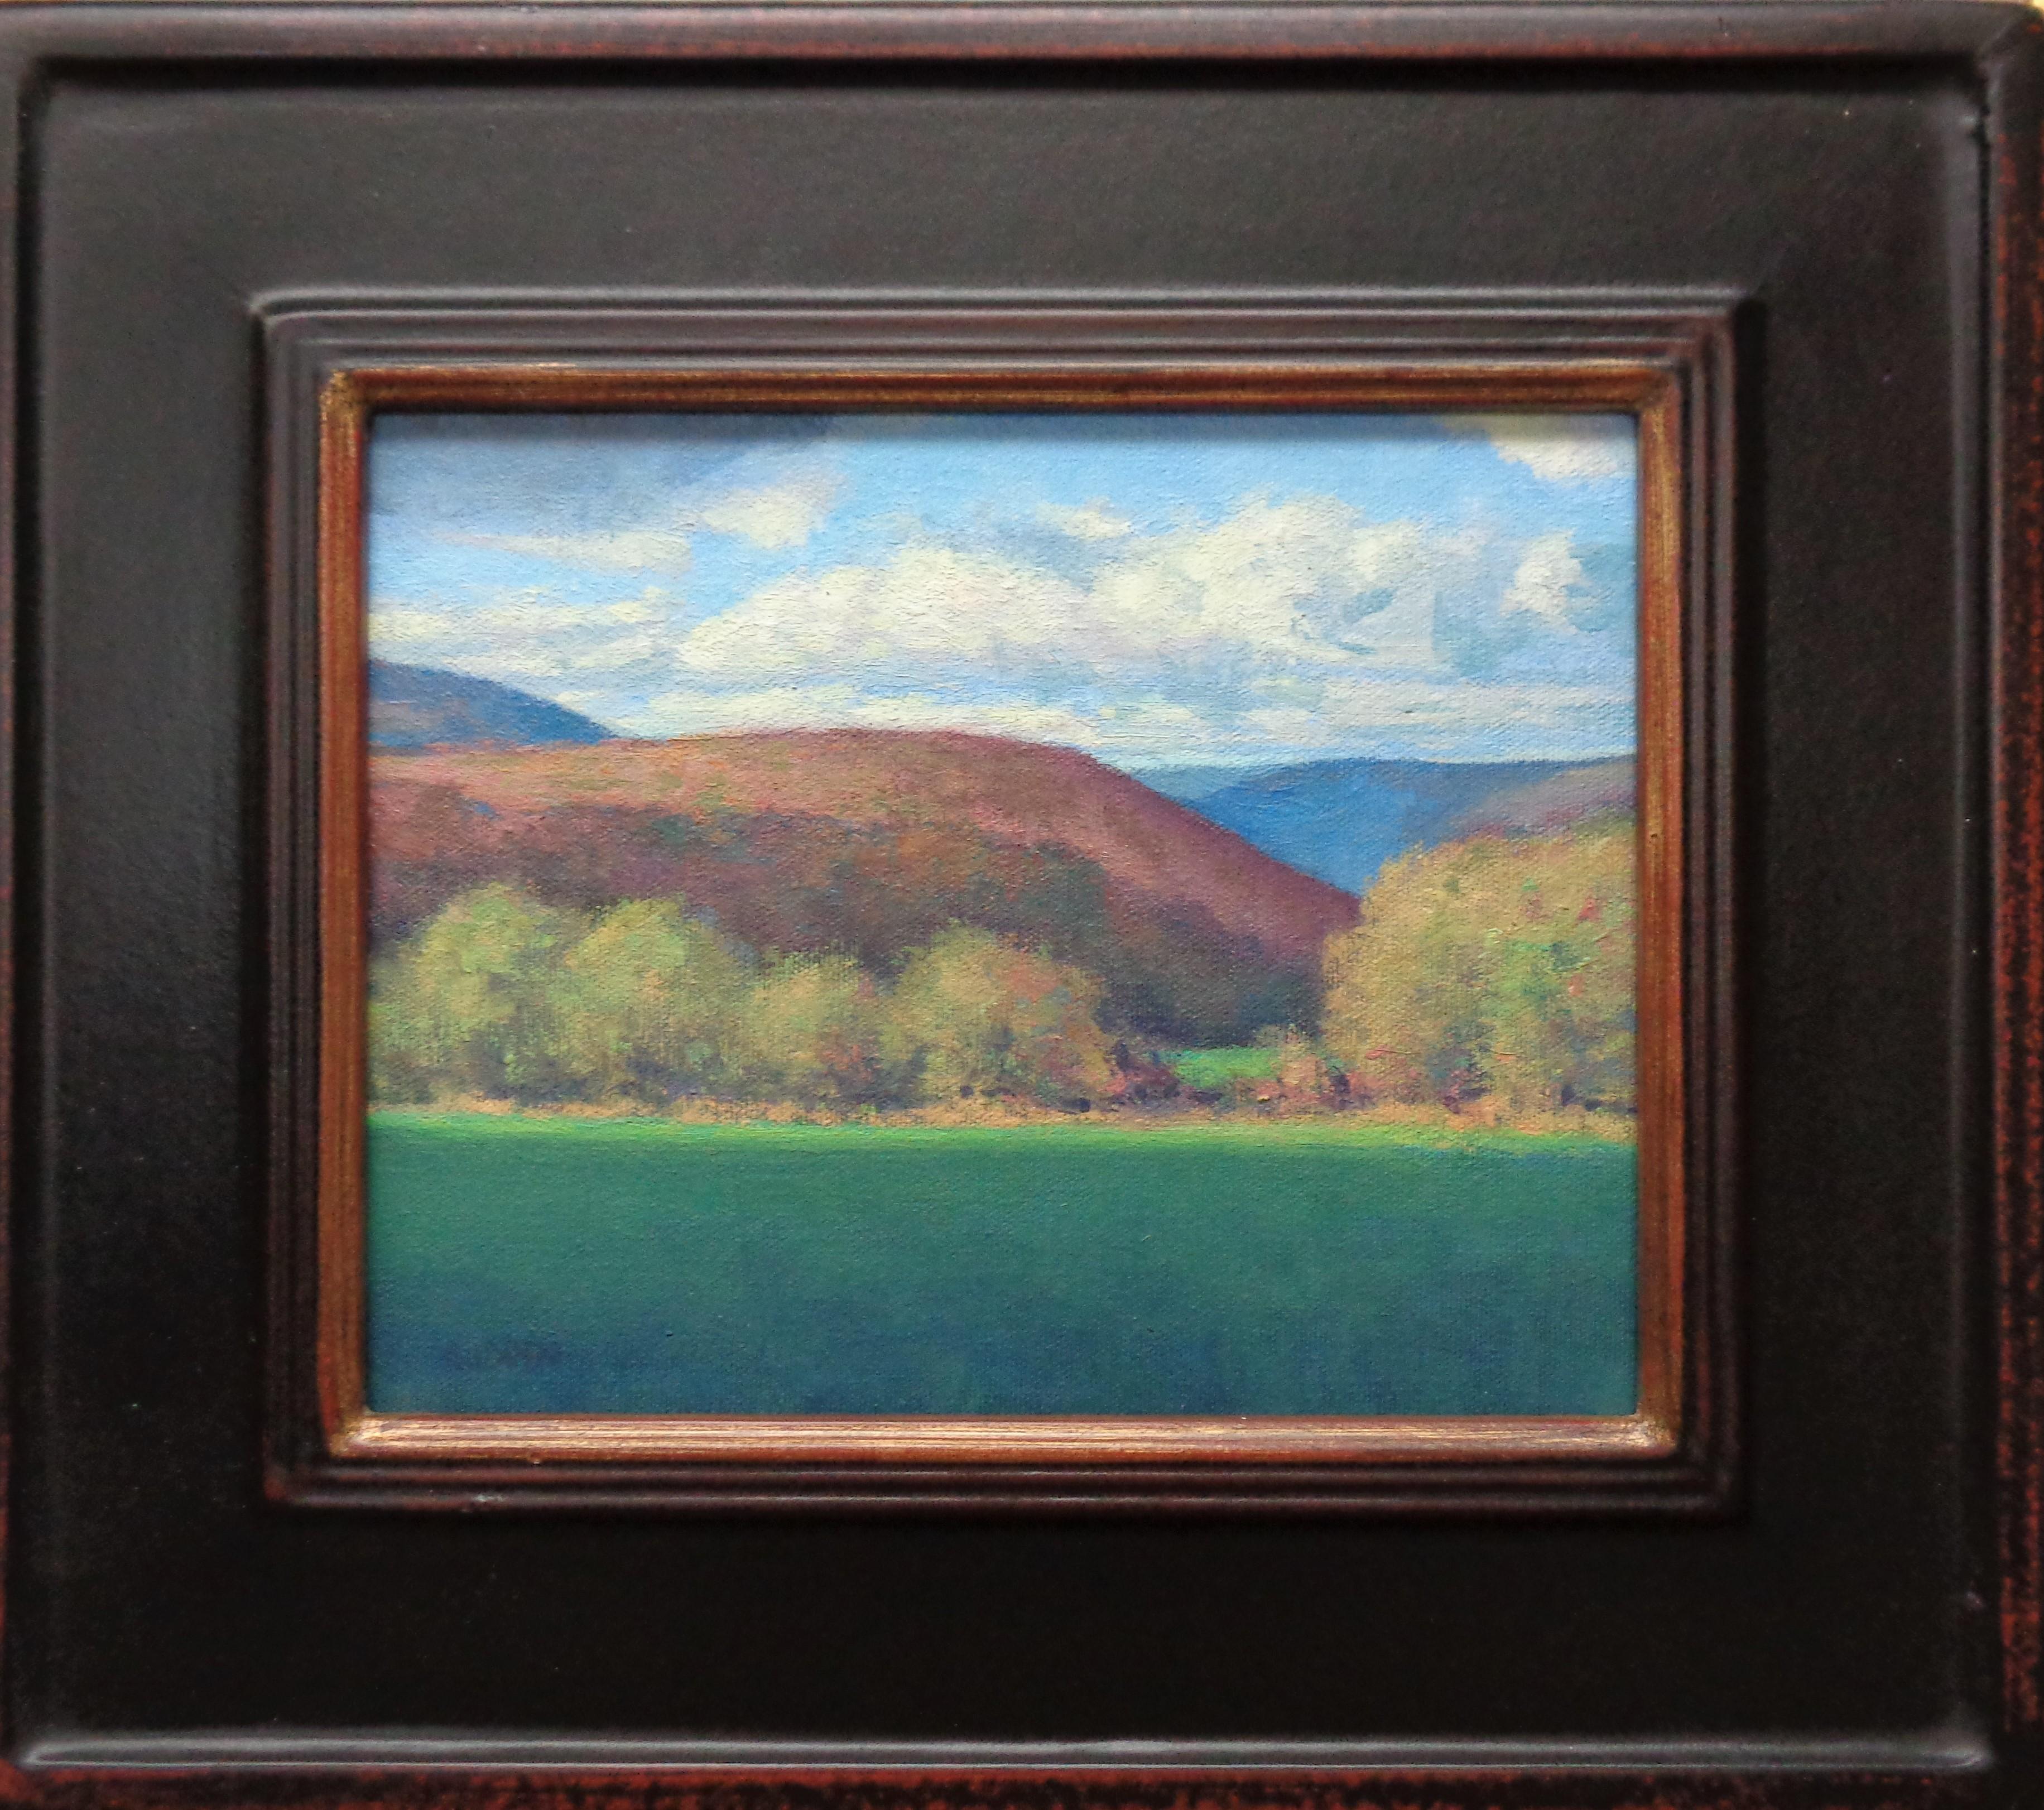 Vermont Hills 1
oil/panel
8n x 10 unframed 13.5 x 15.5 framed
Vermont Hills I is an oil painting on canvas panel that showcases the beautiful light shinning on a Vermont mountain scene in autumn. 
ARTIST'S STATEMENT
I have been in the art business